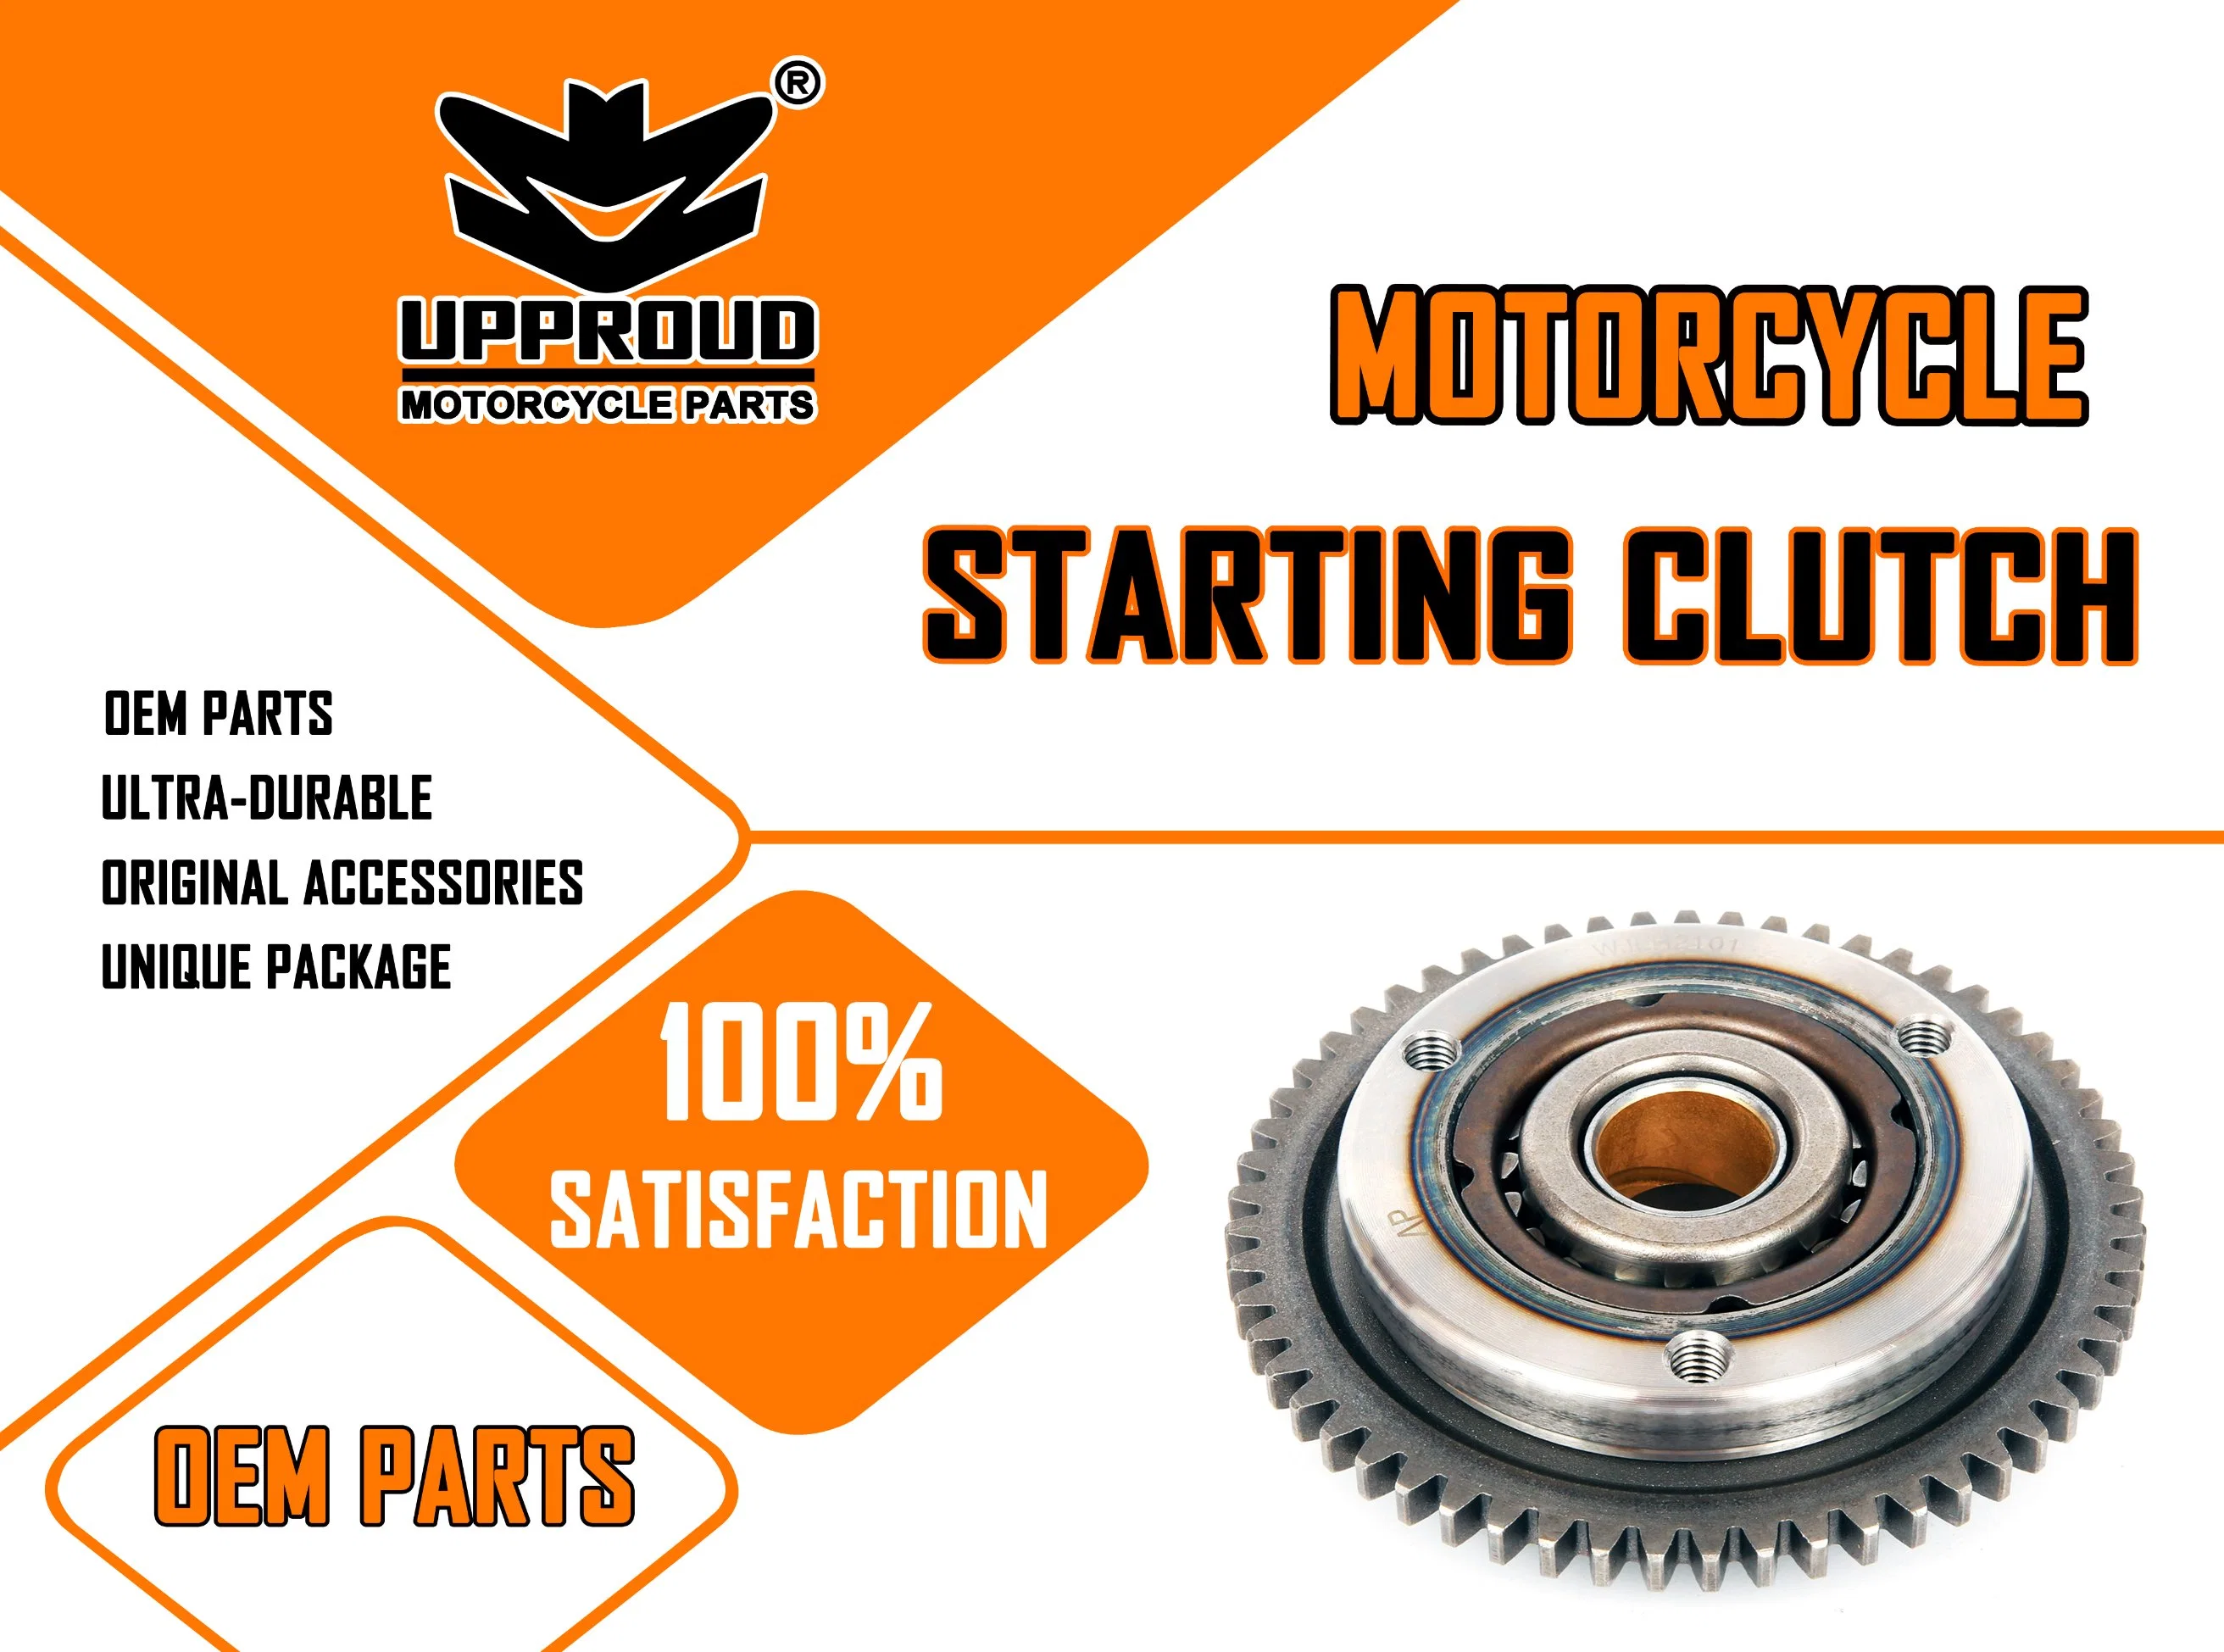 Cg200 Starting Clutch High Quality Motorcycle Parts